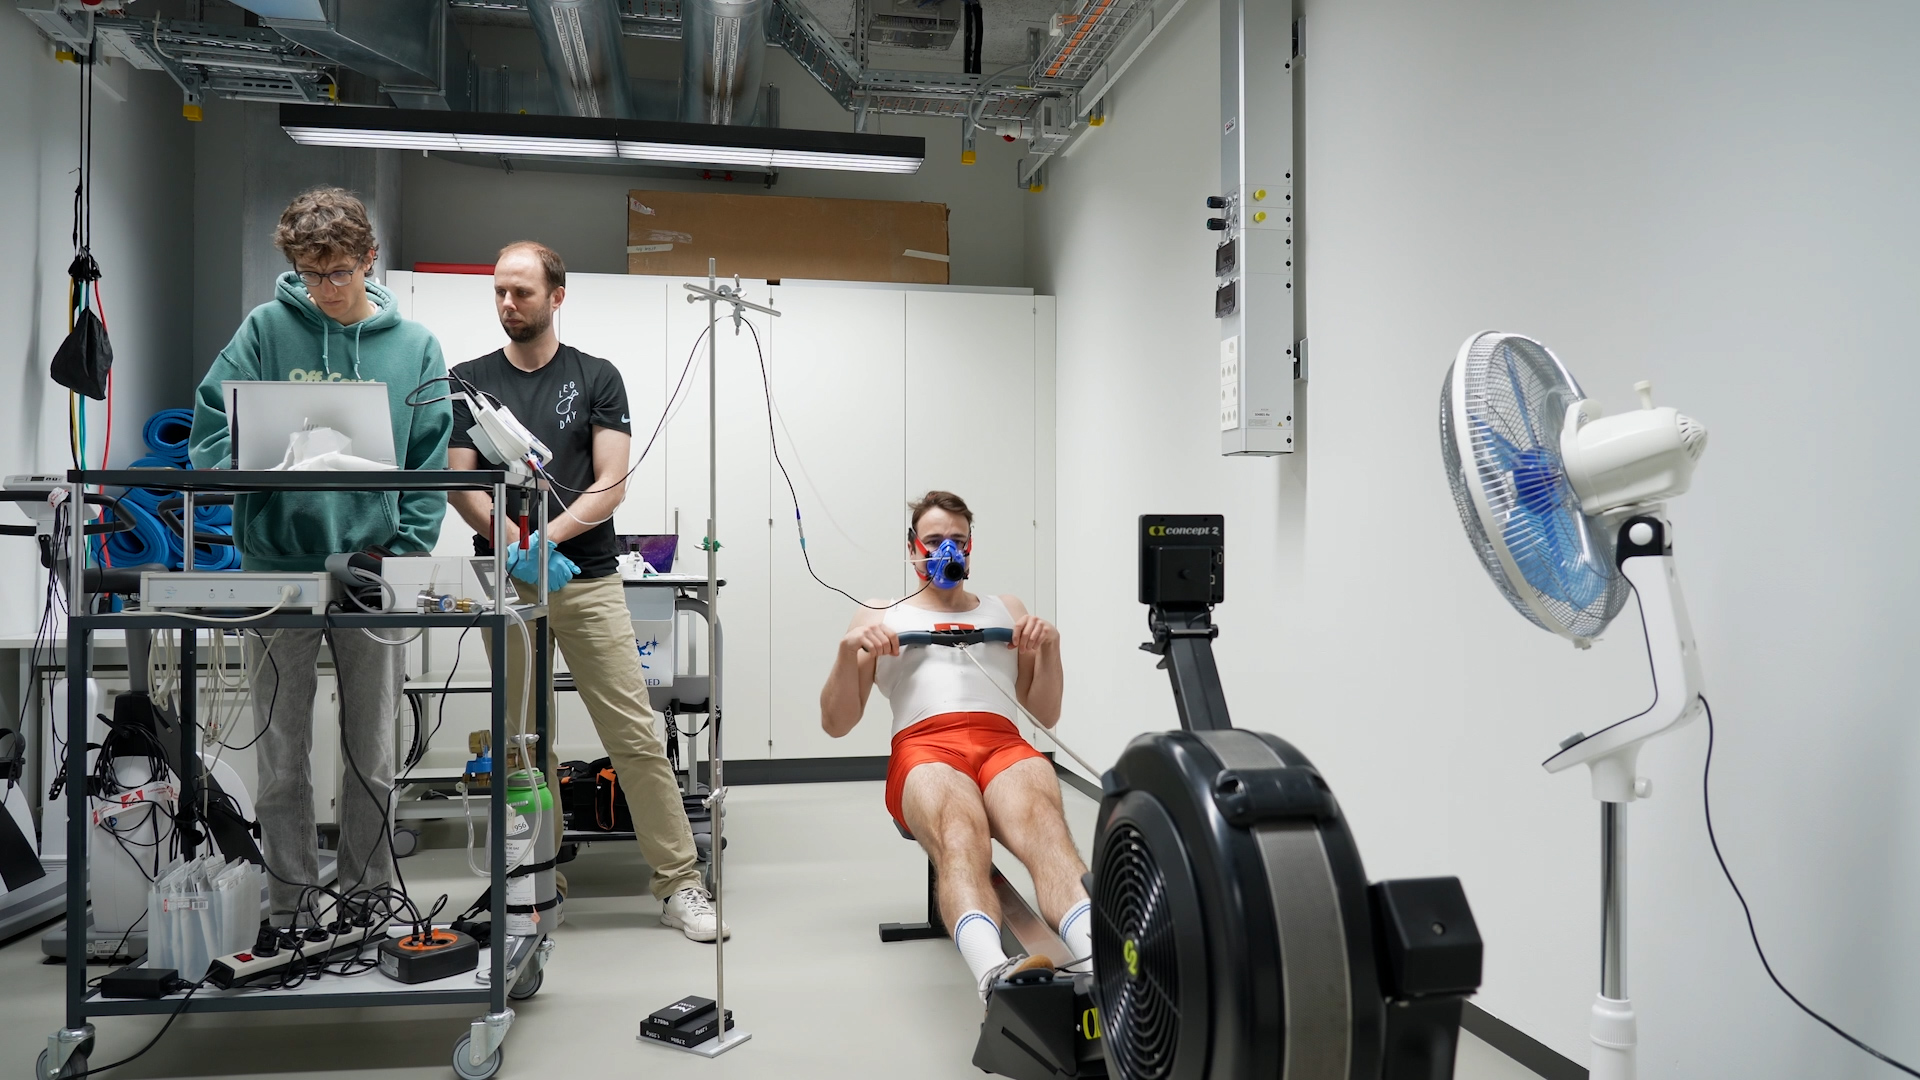 A man on the rowing machine is monitored by two people.